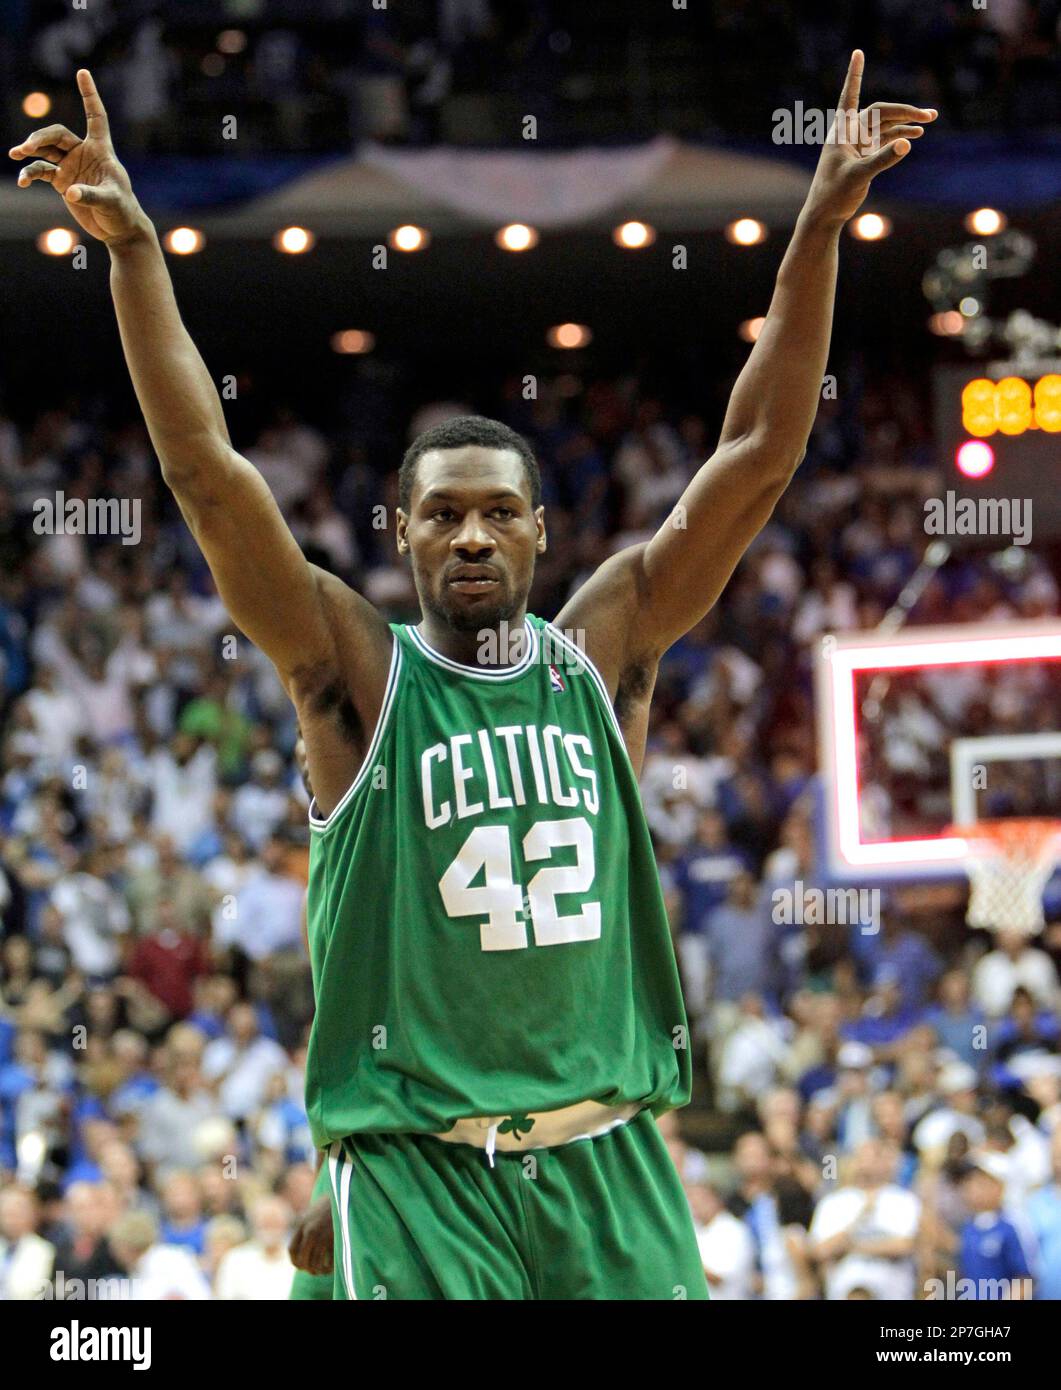 Boston Celtics guard Tony Allen raises his arms as he walks off the court  after the Celtics defeated the Orlando Magic 95-92 in Game 2 of the NBA  Eastern Conference basketball finals